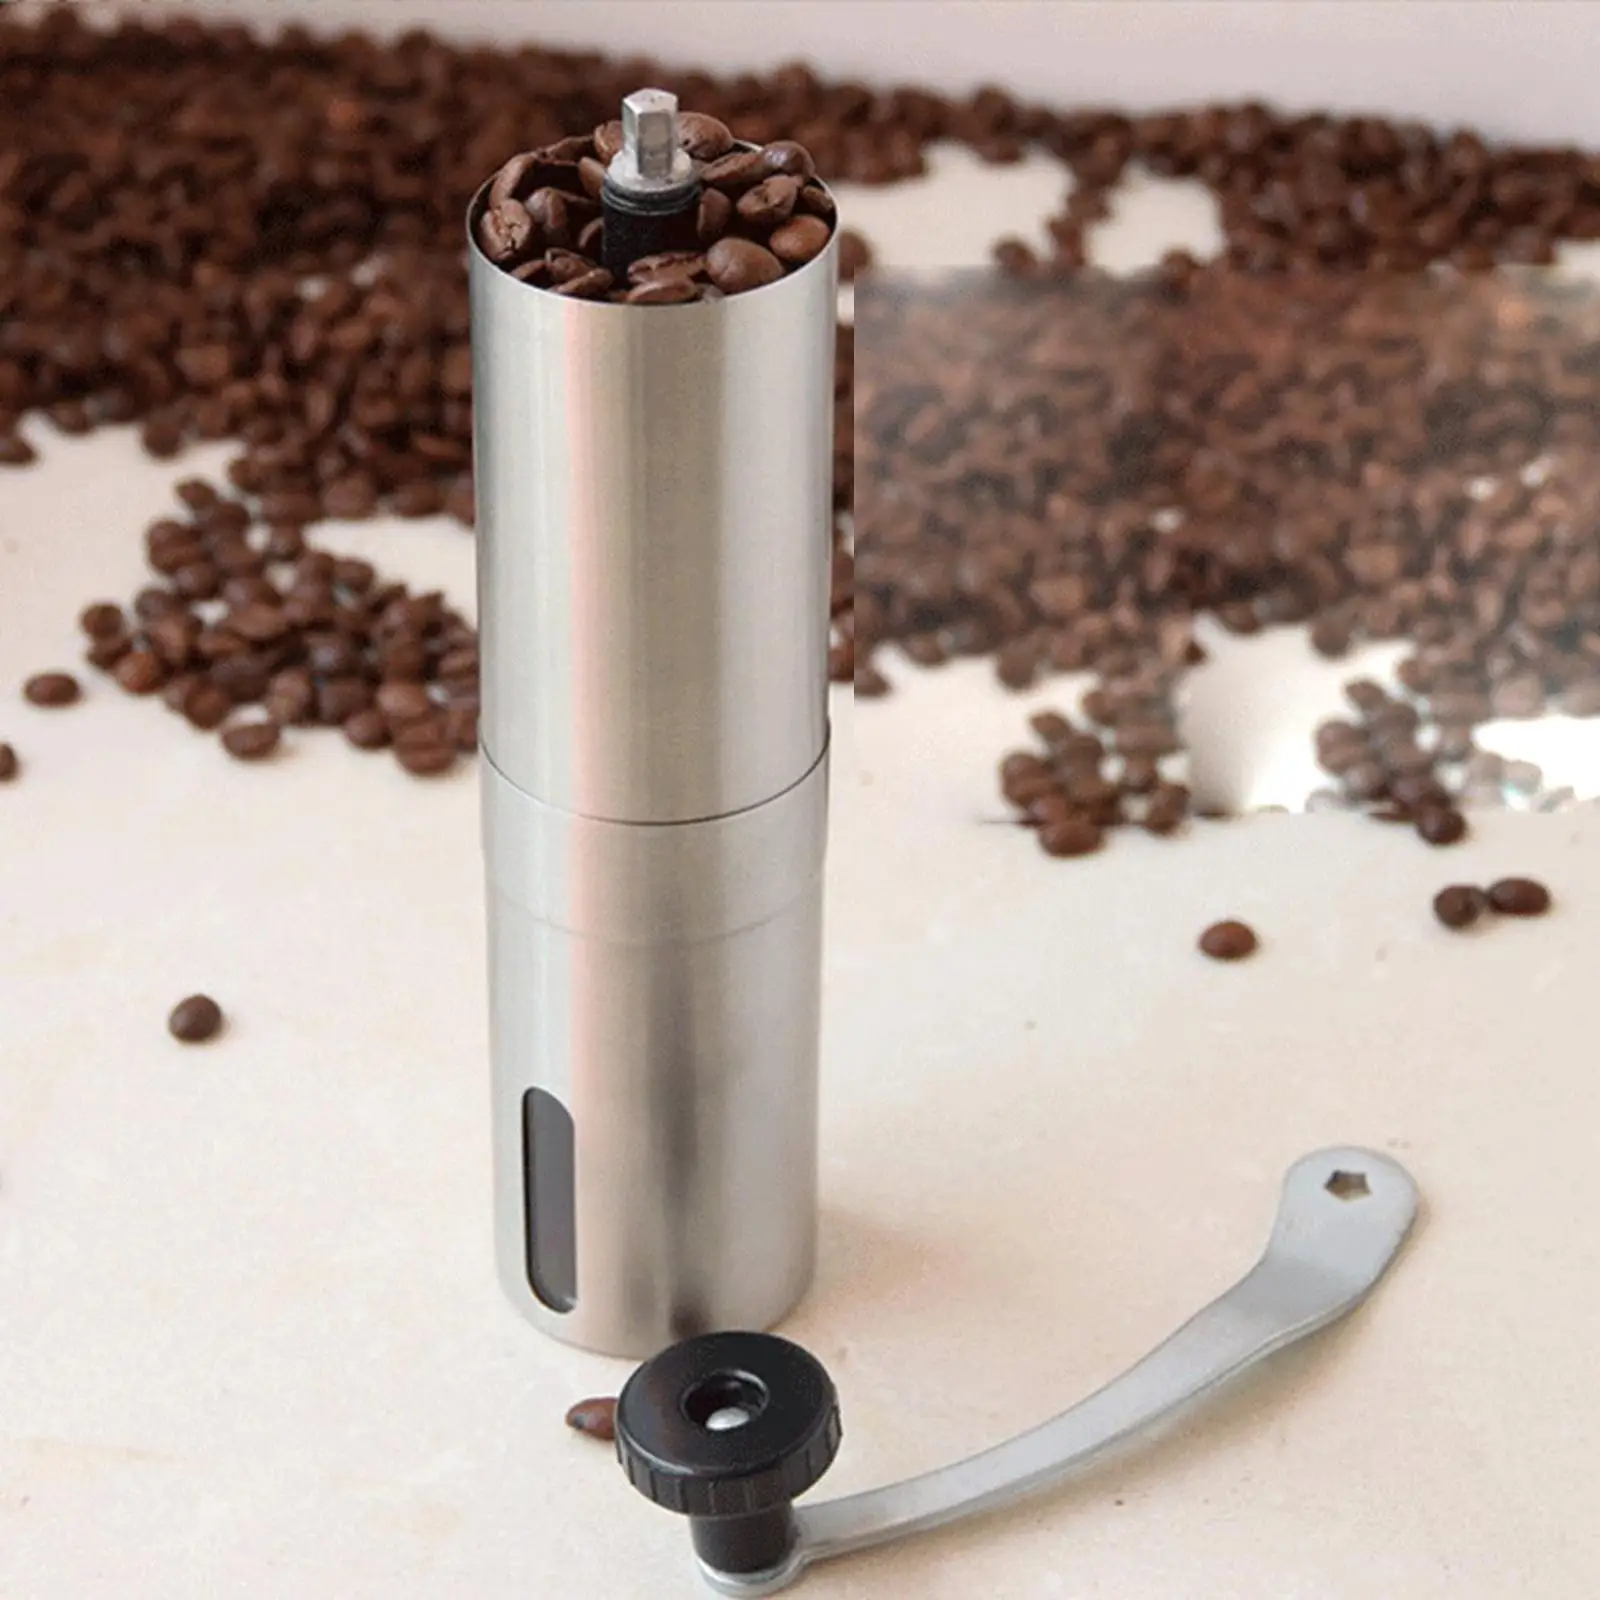 Manual Coffee Grinder, Hand Grinder Coffee Bean Grinder for Travel Picnic Office